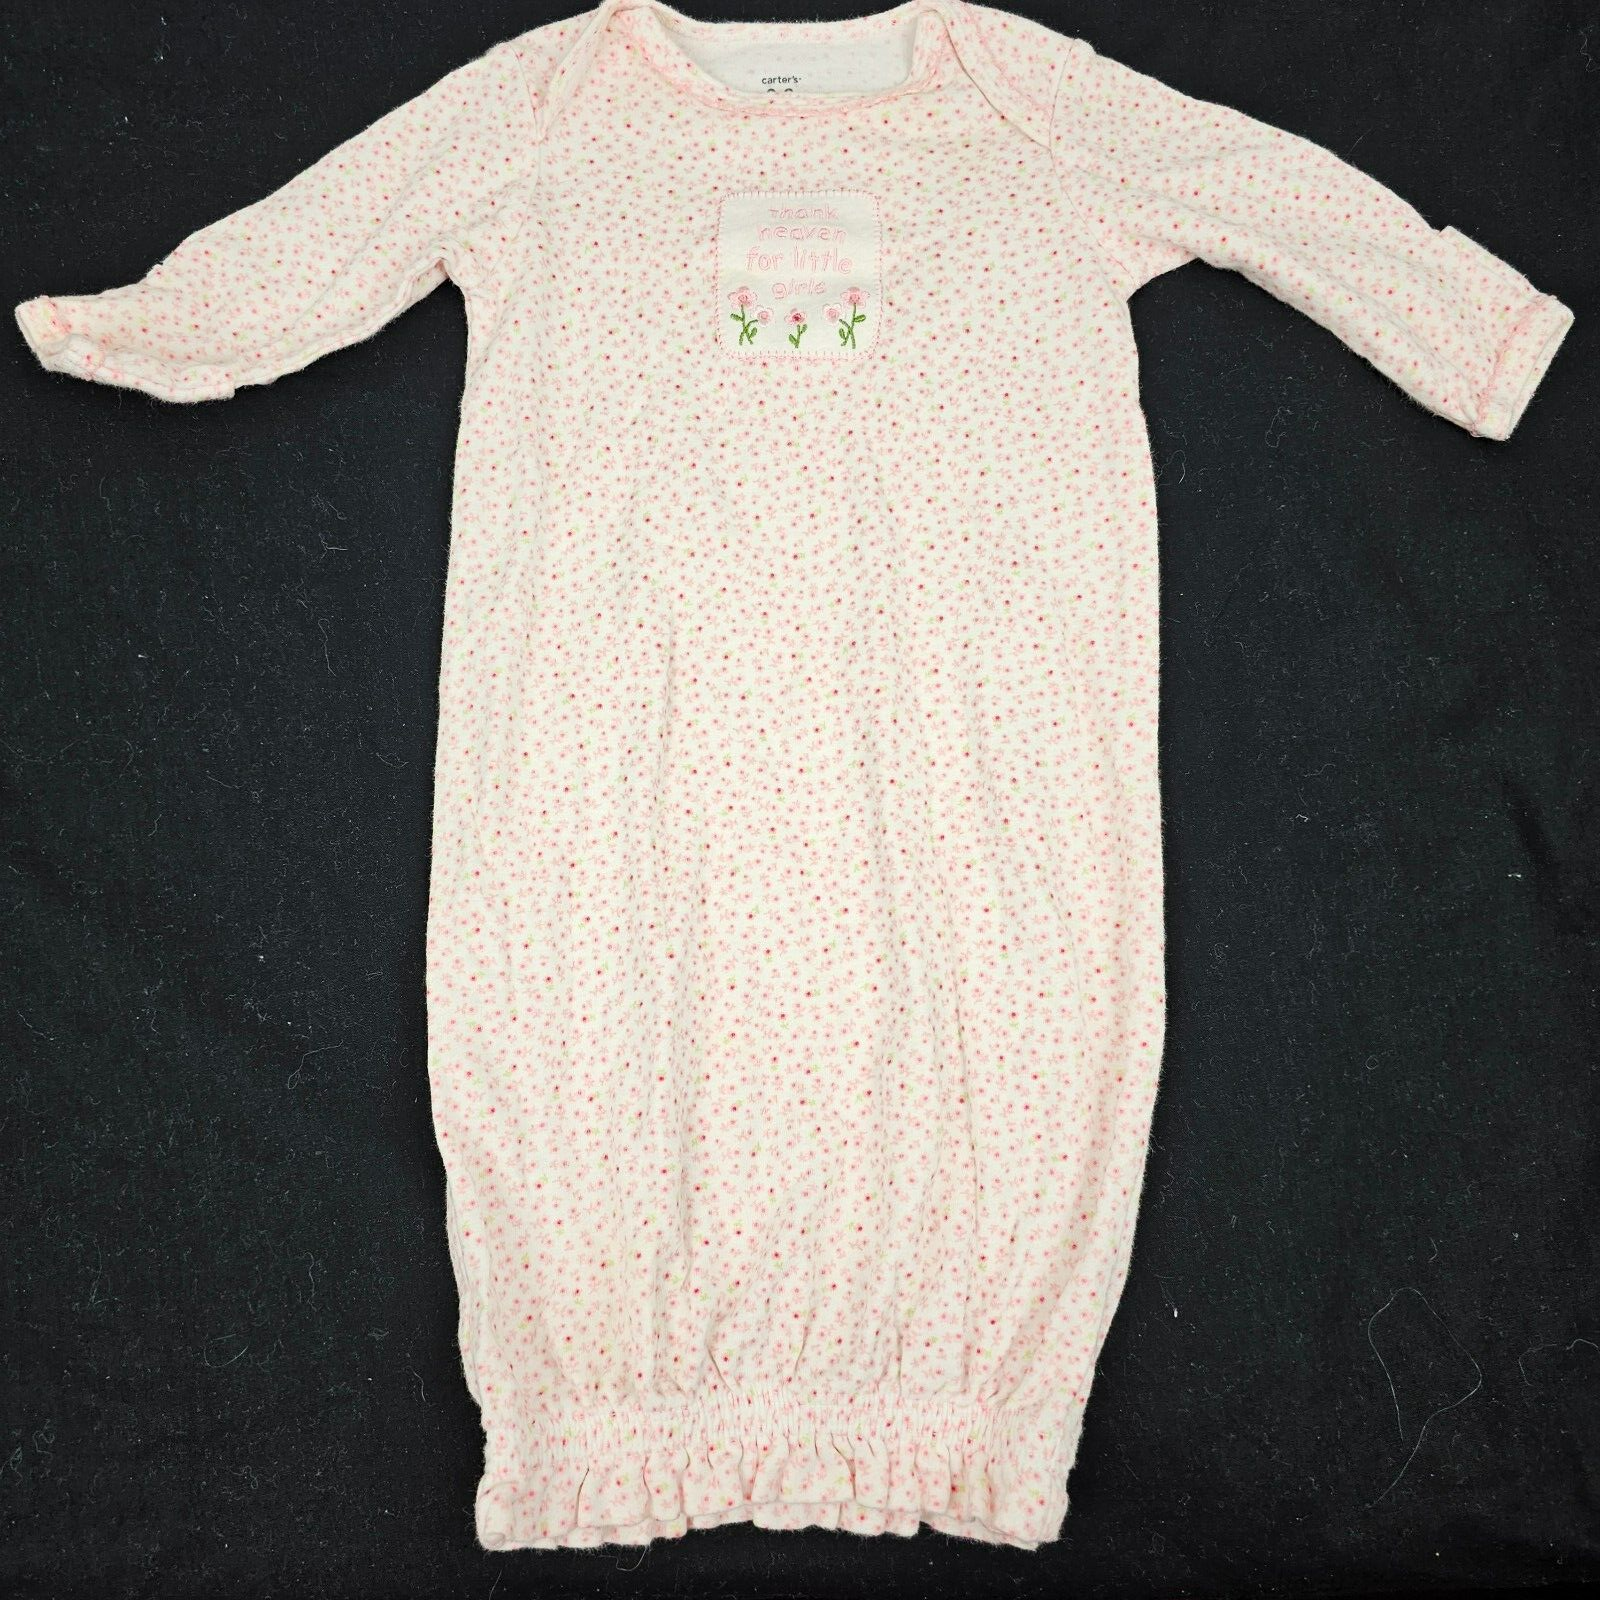 Primary image for Baby Infant Girl Clothes Vintage Carters Thank Heaven for Little Pink Gown 0-3